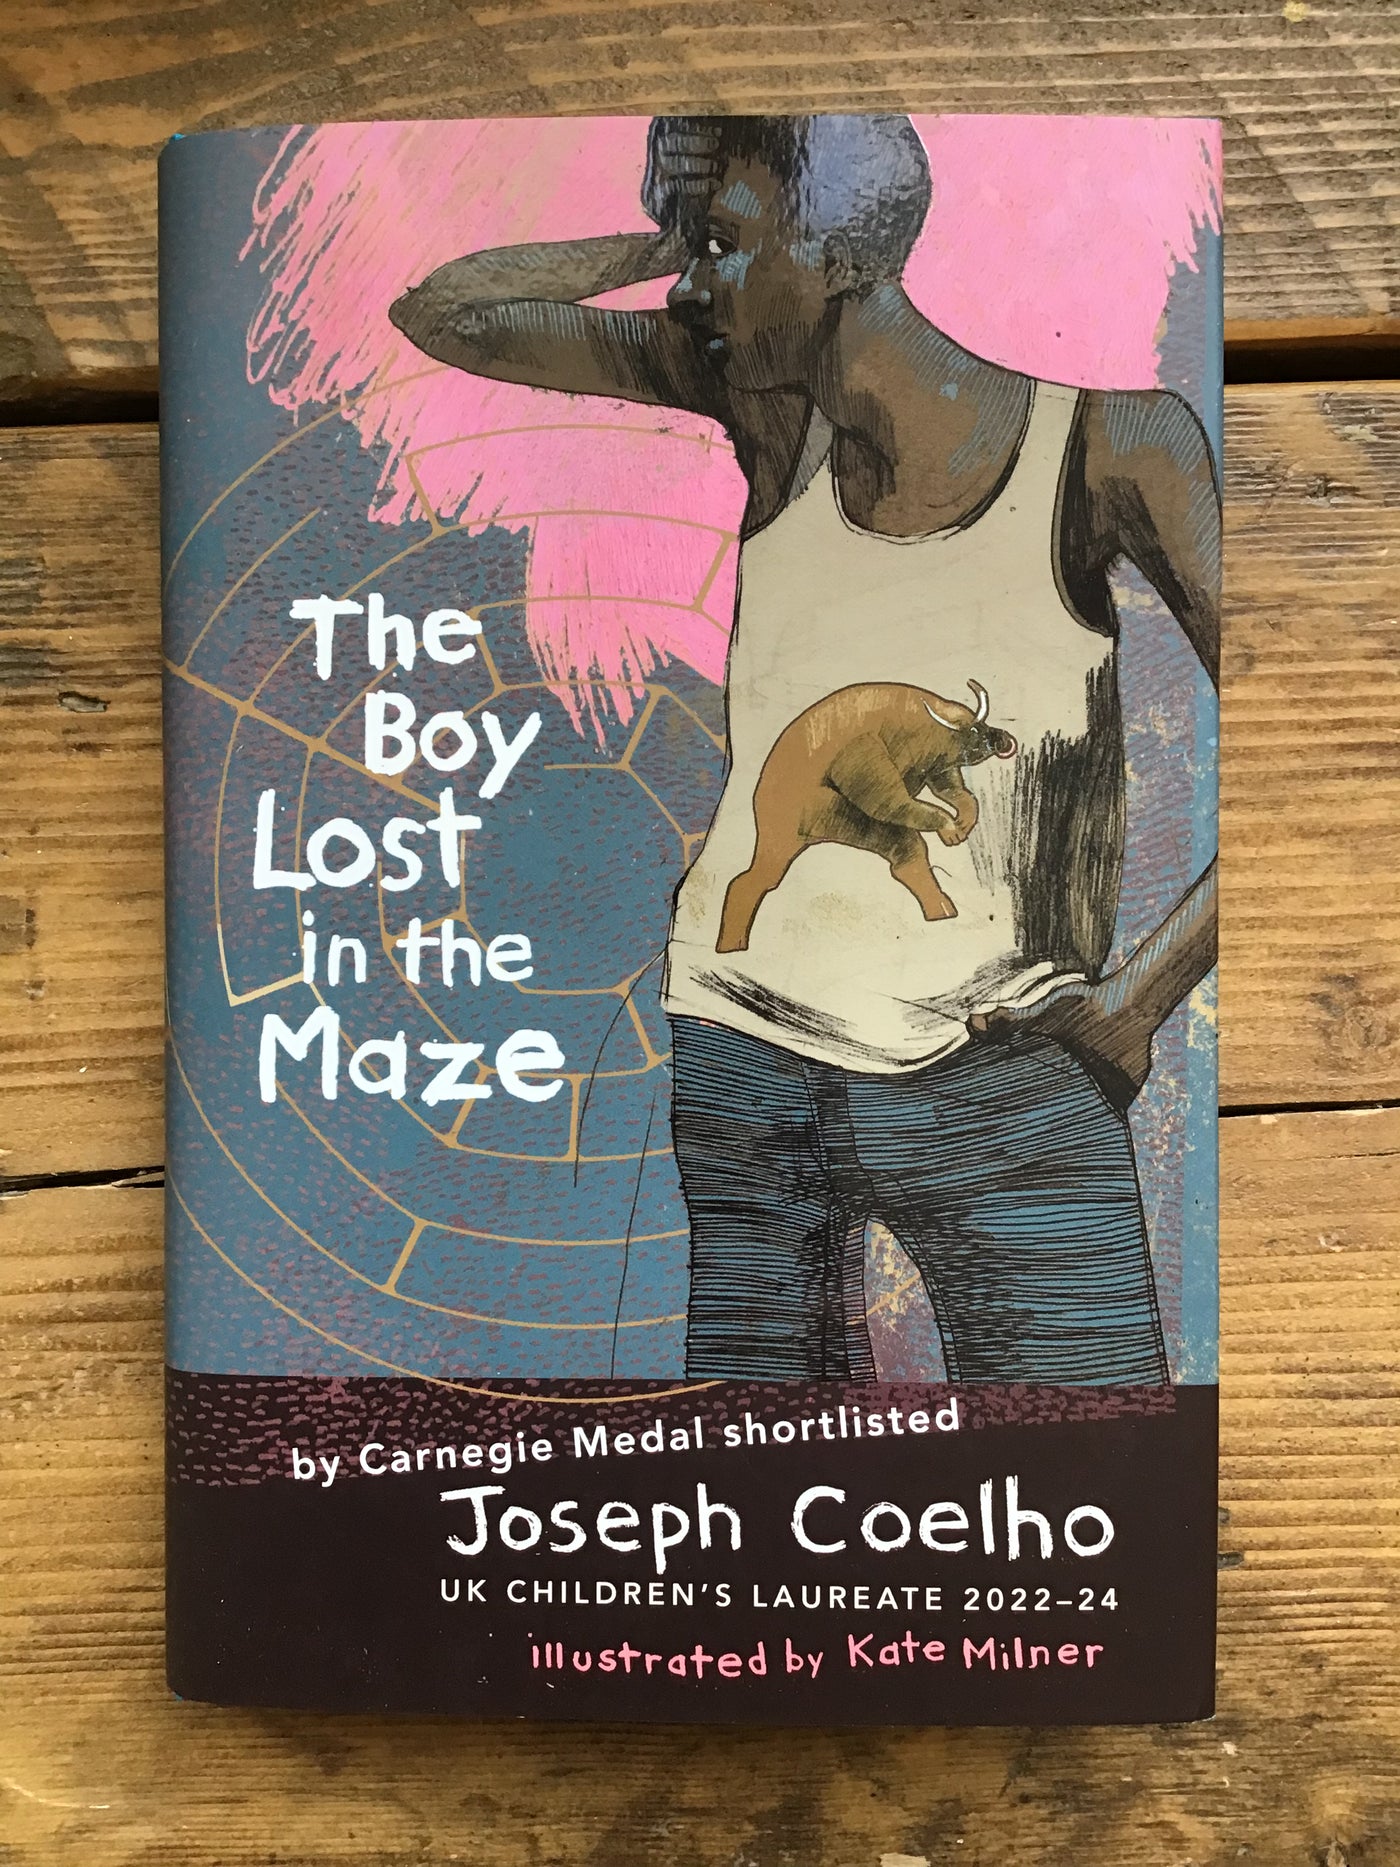 The Boy Lost in the Maze